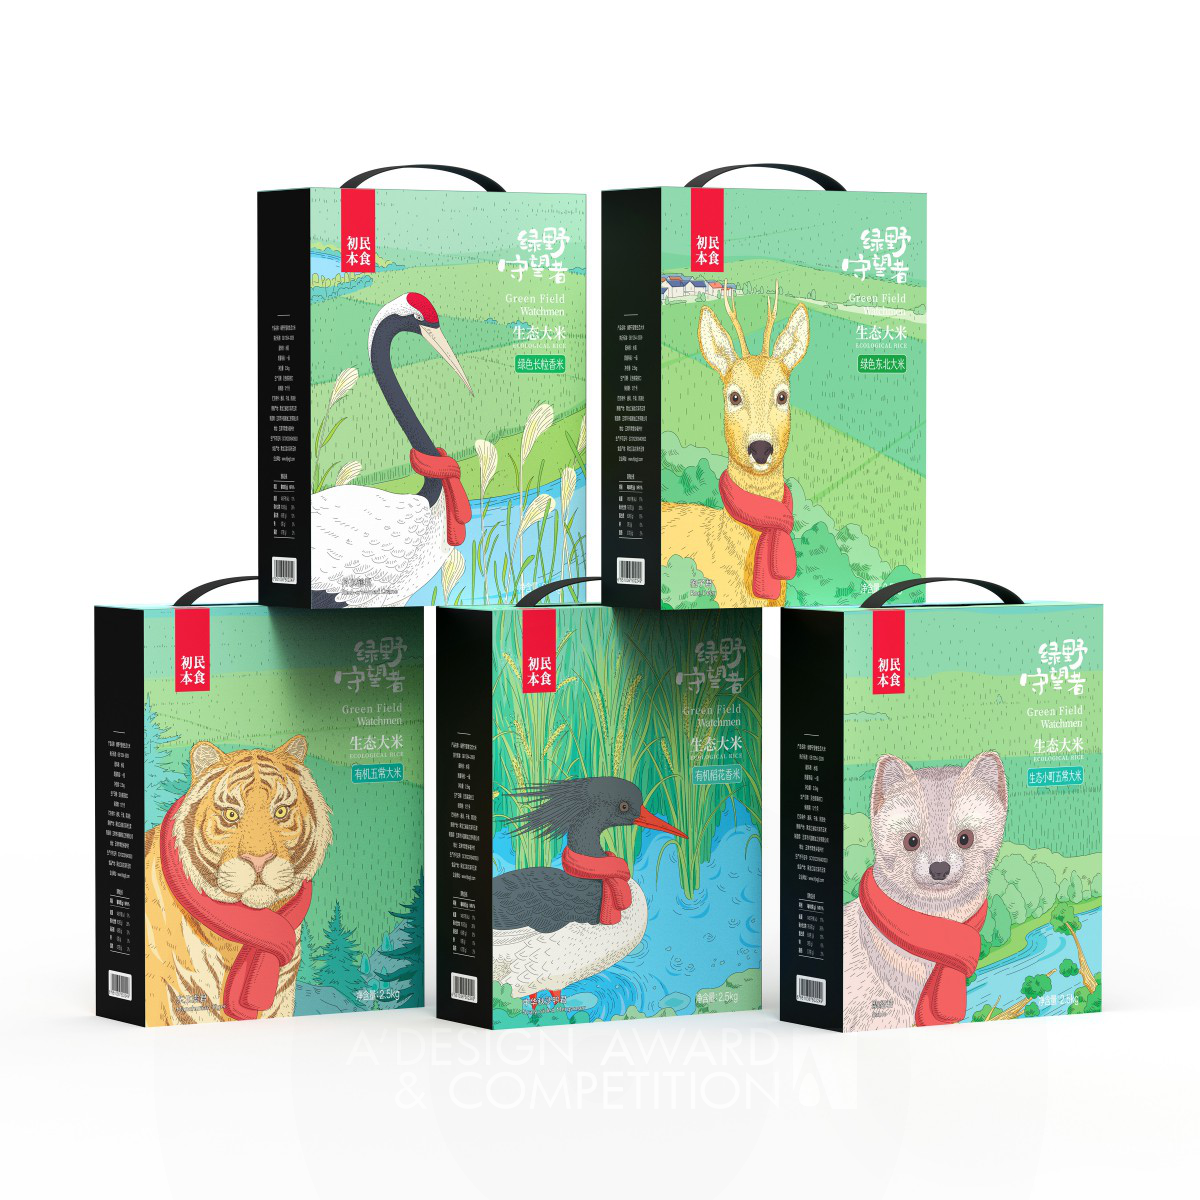 Peng GuoZhi wins Silver at the prestigious A' Packaging Design Award with Green Field Watchmen Packaging Of Rice.